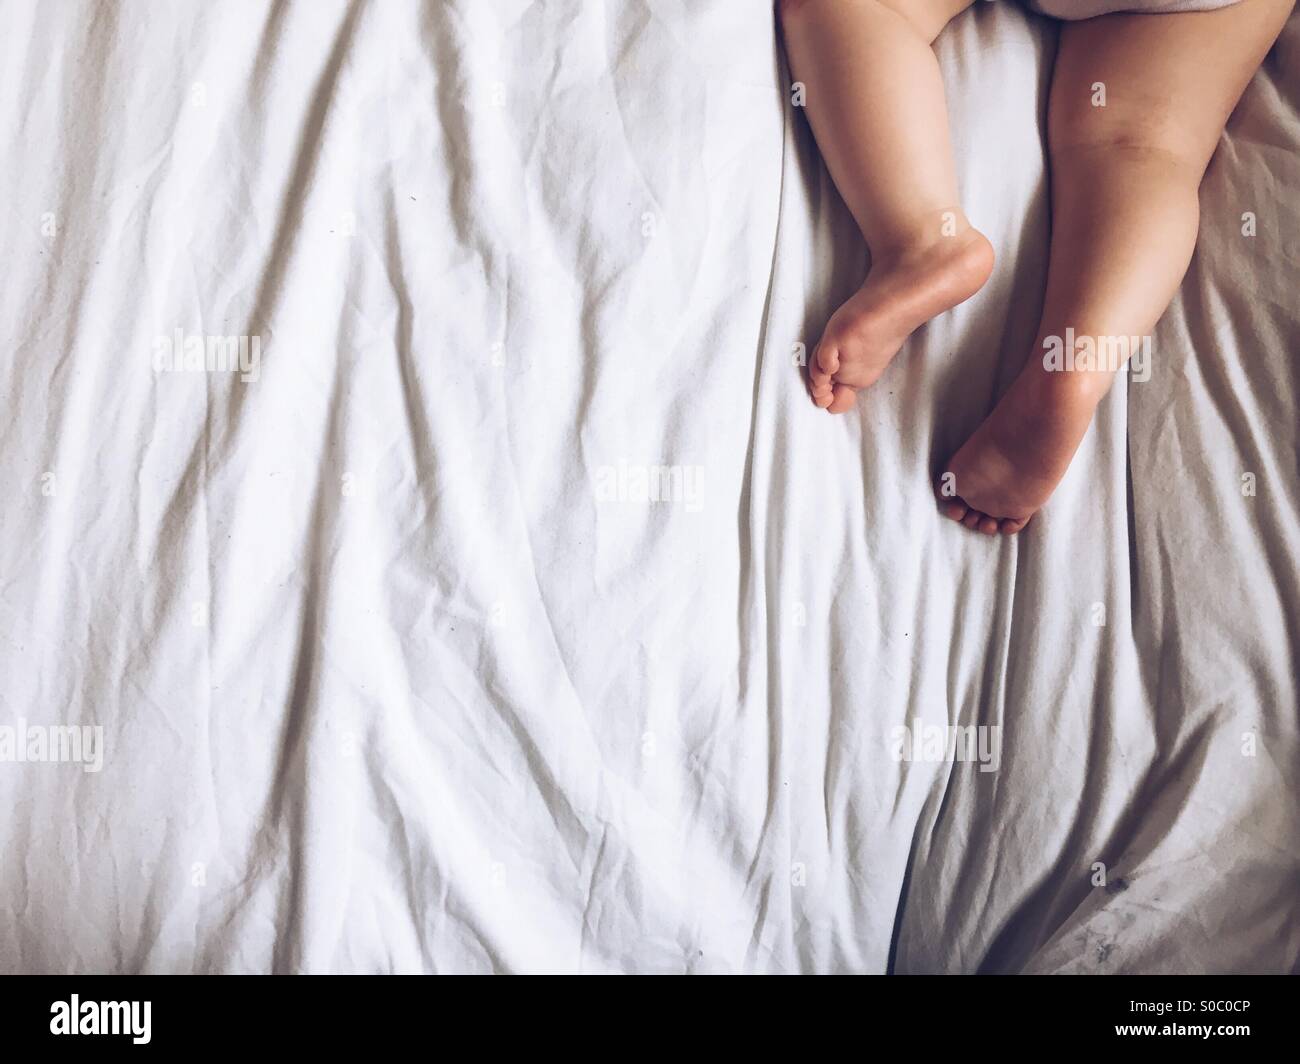 Image of baby's legs while she's asleep on the bed Stock Photo